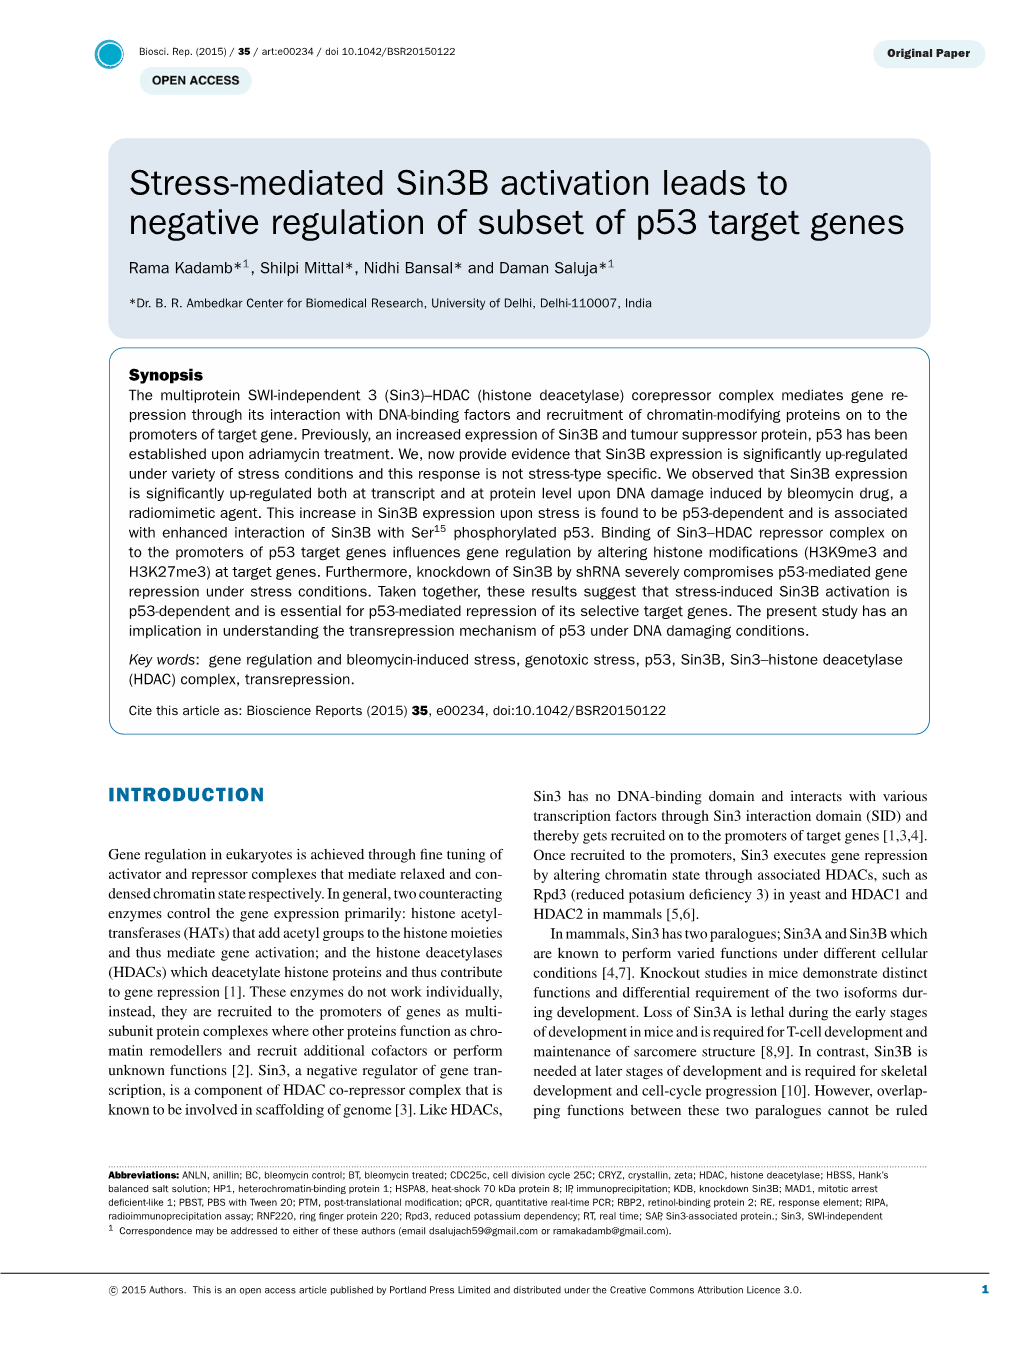 Stress-Mediated Sin3b Activation Leads to Negative Regulation of Subset of P53 Target Genes